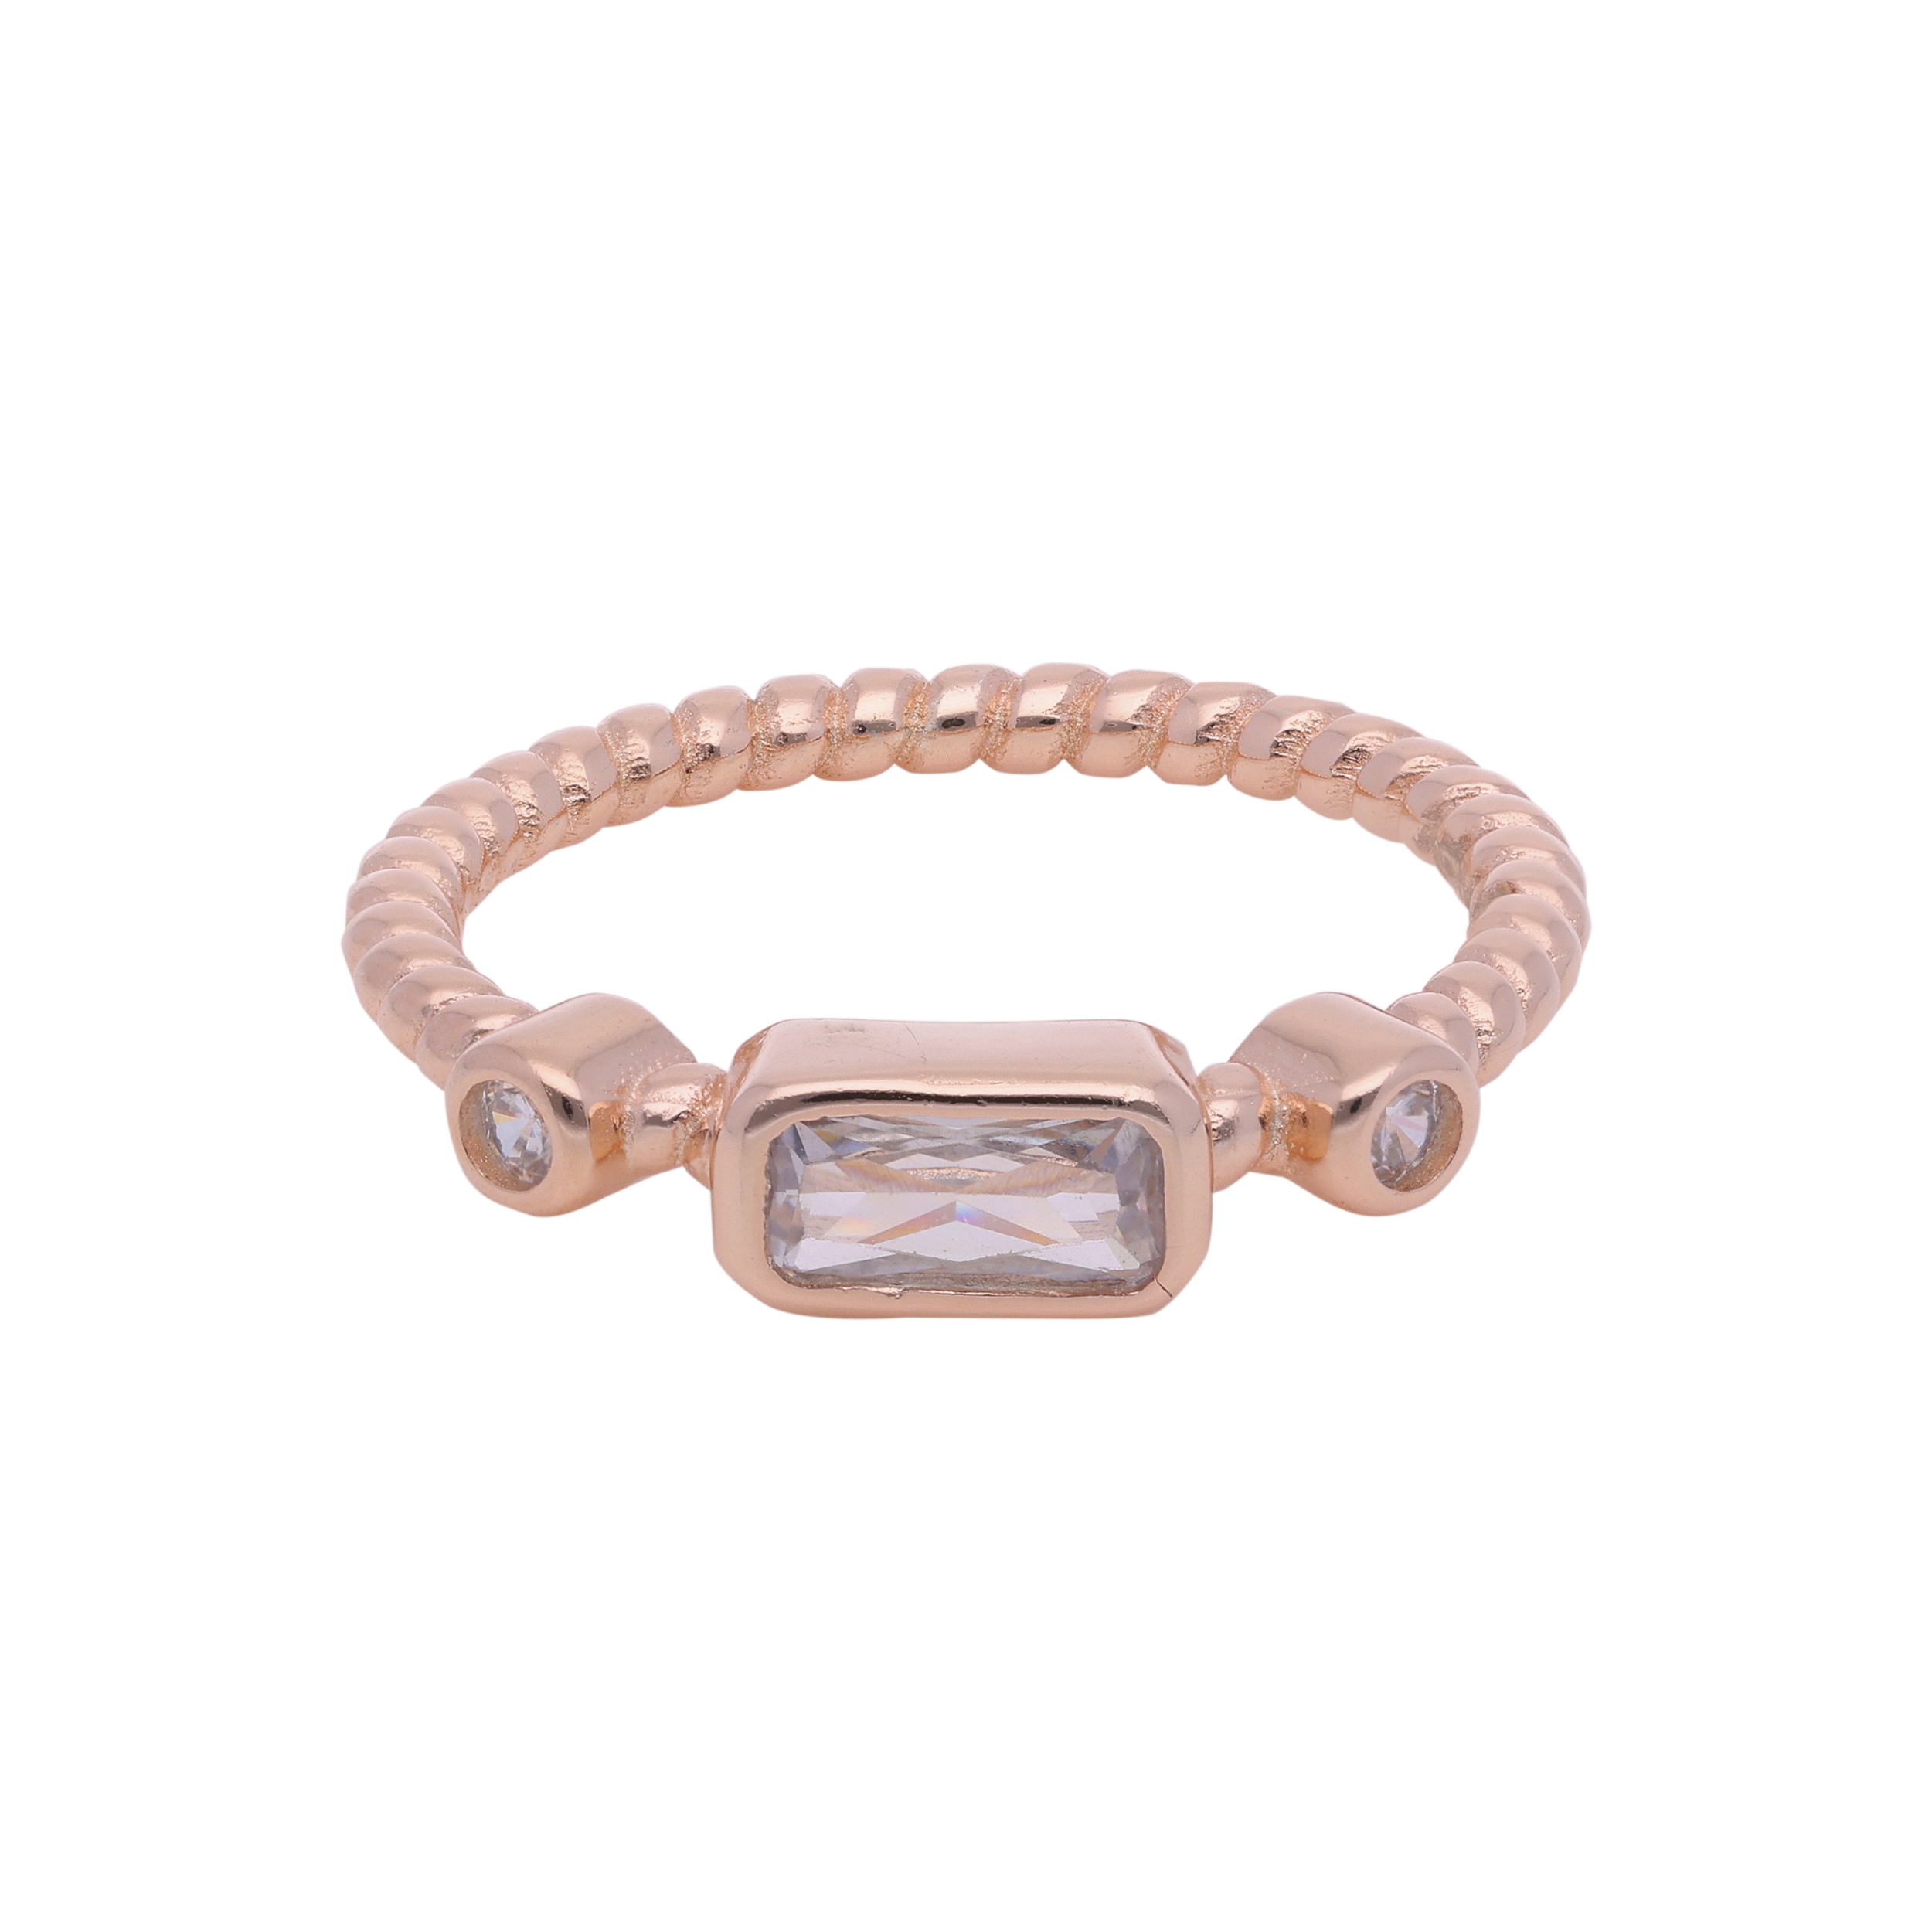 Elegant Rose: Sterling Silver Ring with Cubic Zirconia in Rose Gold | SKU : 0019890647, 0019890791